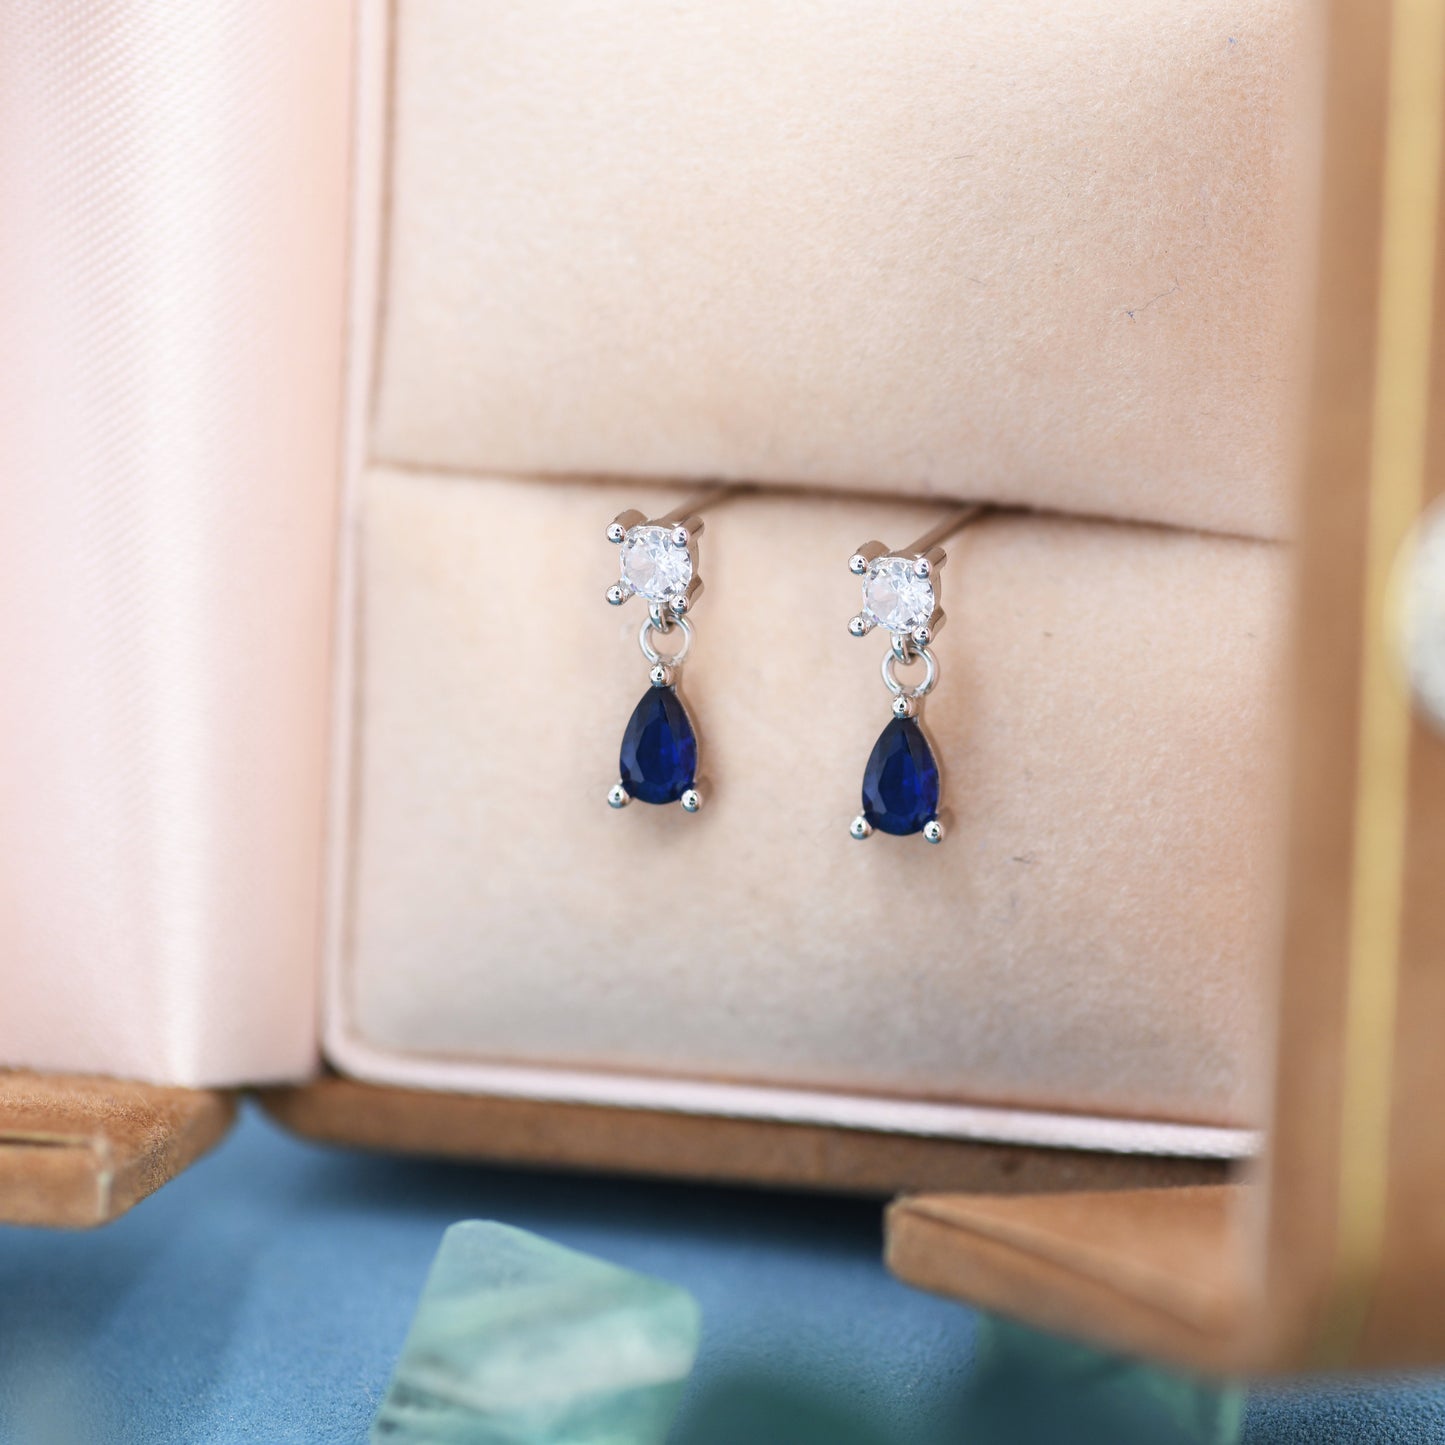 Tiny Sapphire Blue CZ Dangle Stud Earrings in Sterling Silver with Round and Droplet CZ, Silver or Gold, Two CZ Prong Set Earrings